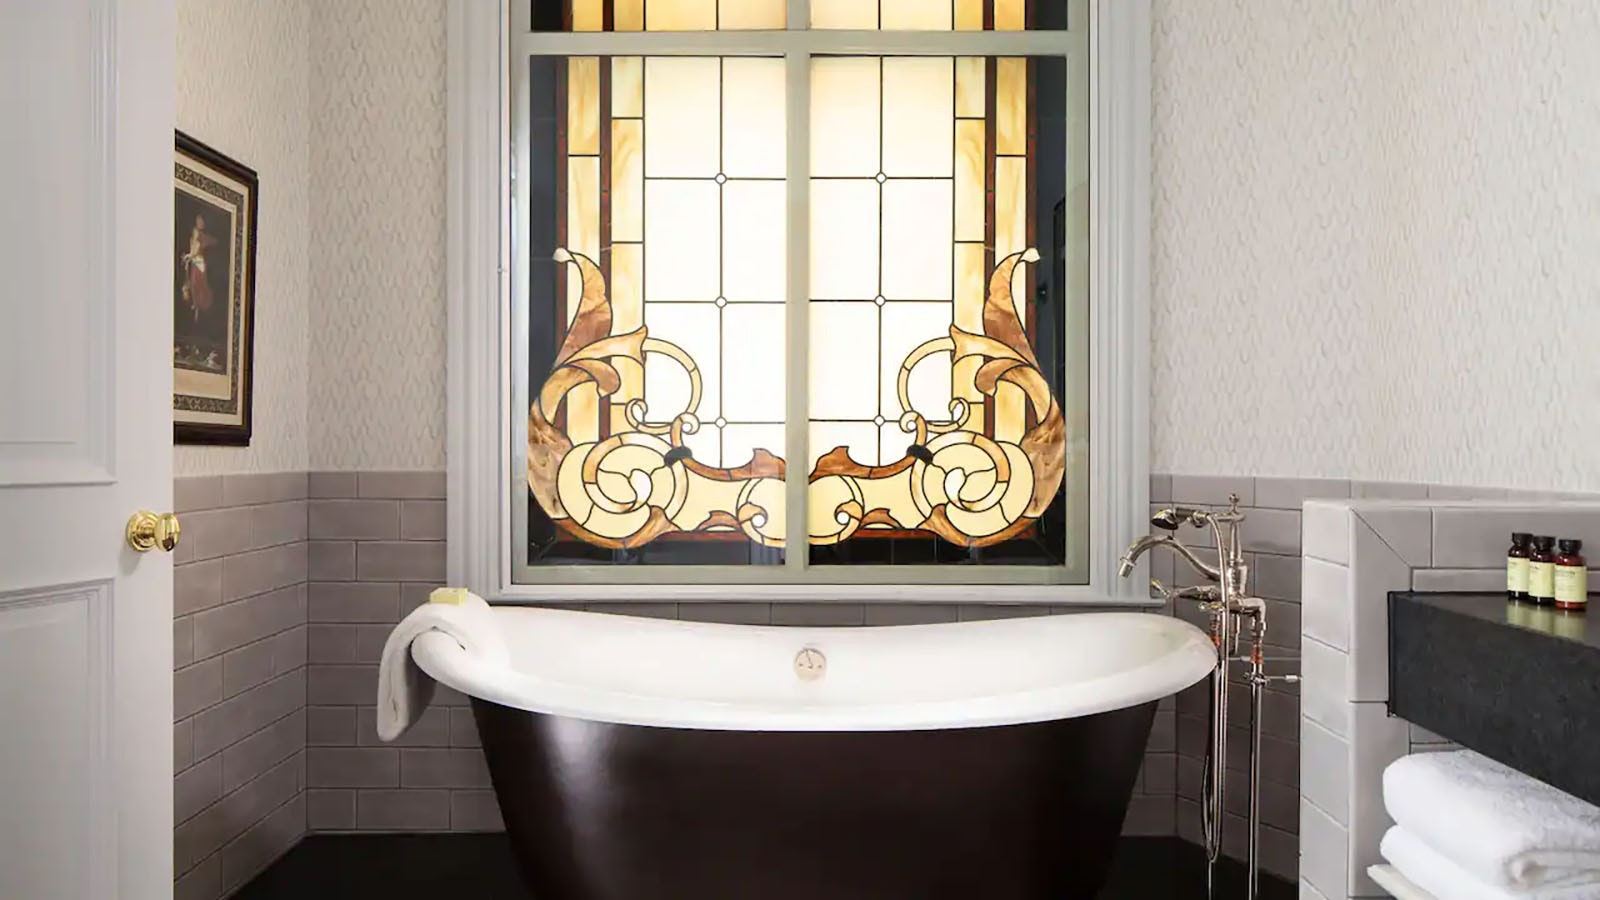 The Heritage Suite bathroom with stained glass.